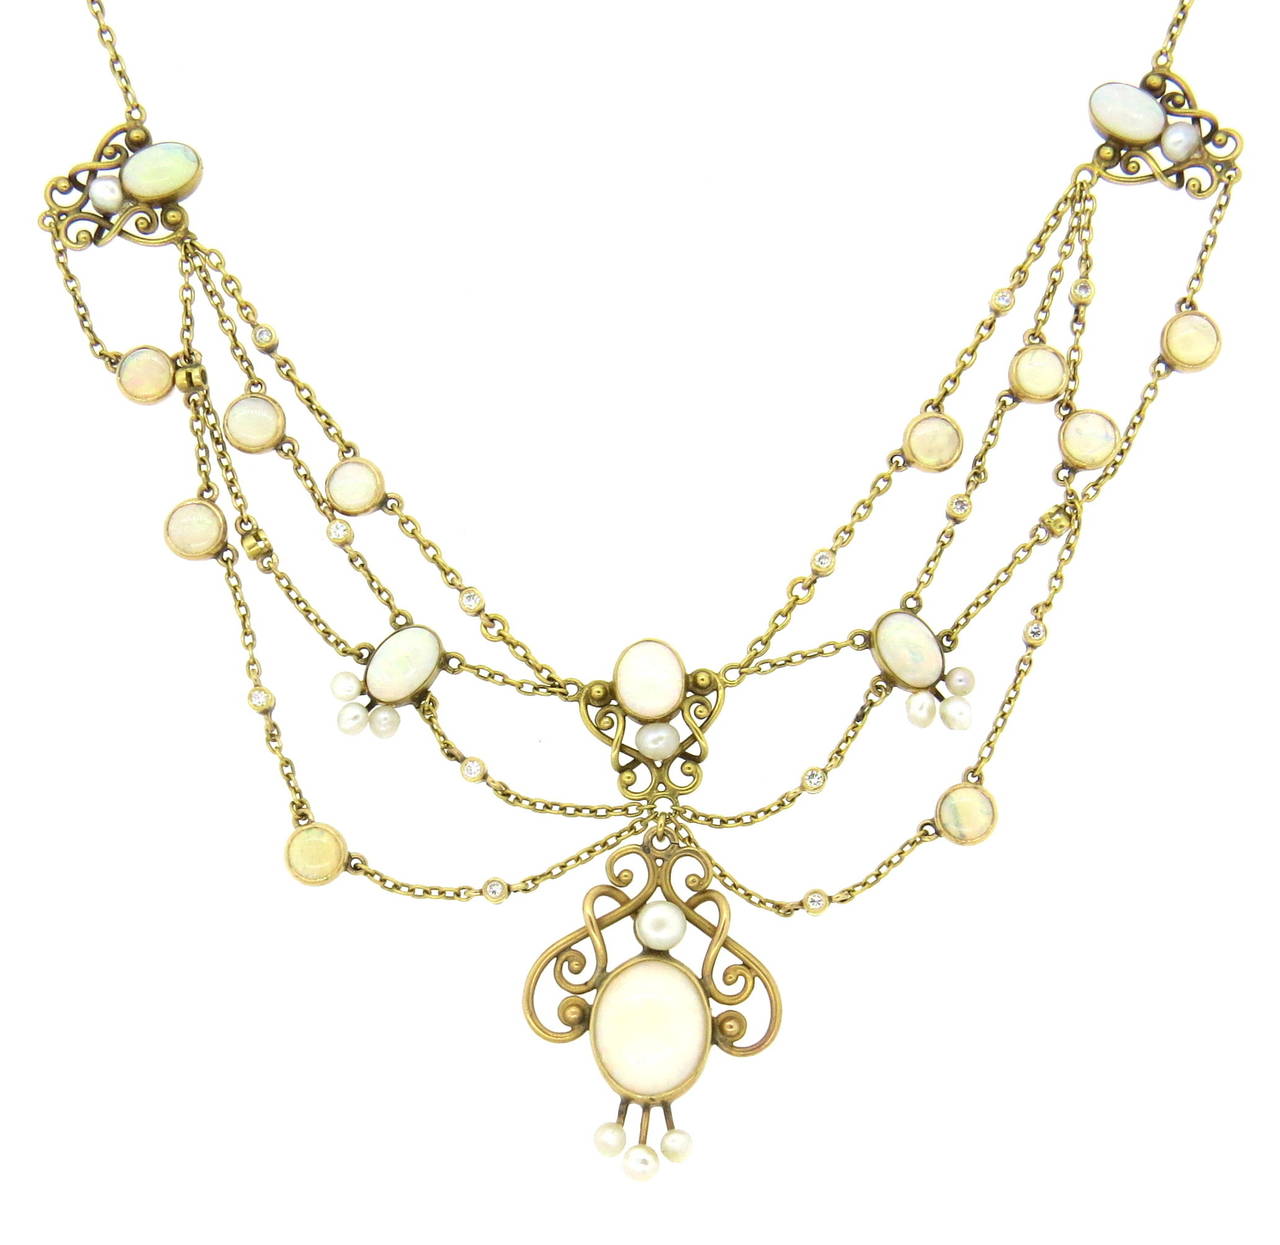 Antique 14k gold necklace, decorated with opals, pearls and diamonds. Necklace is 16